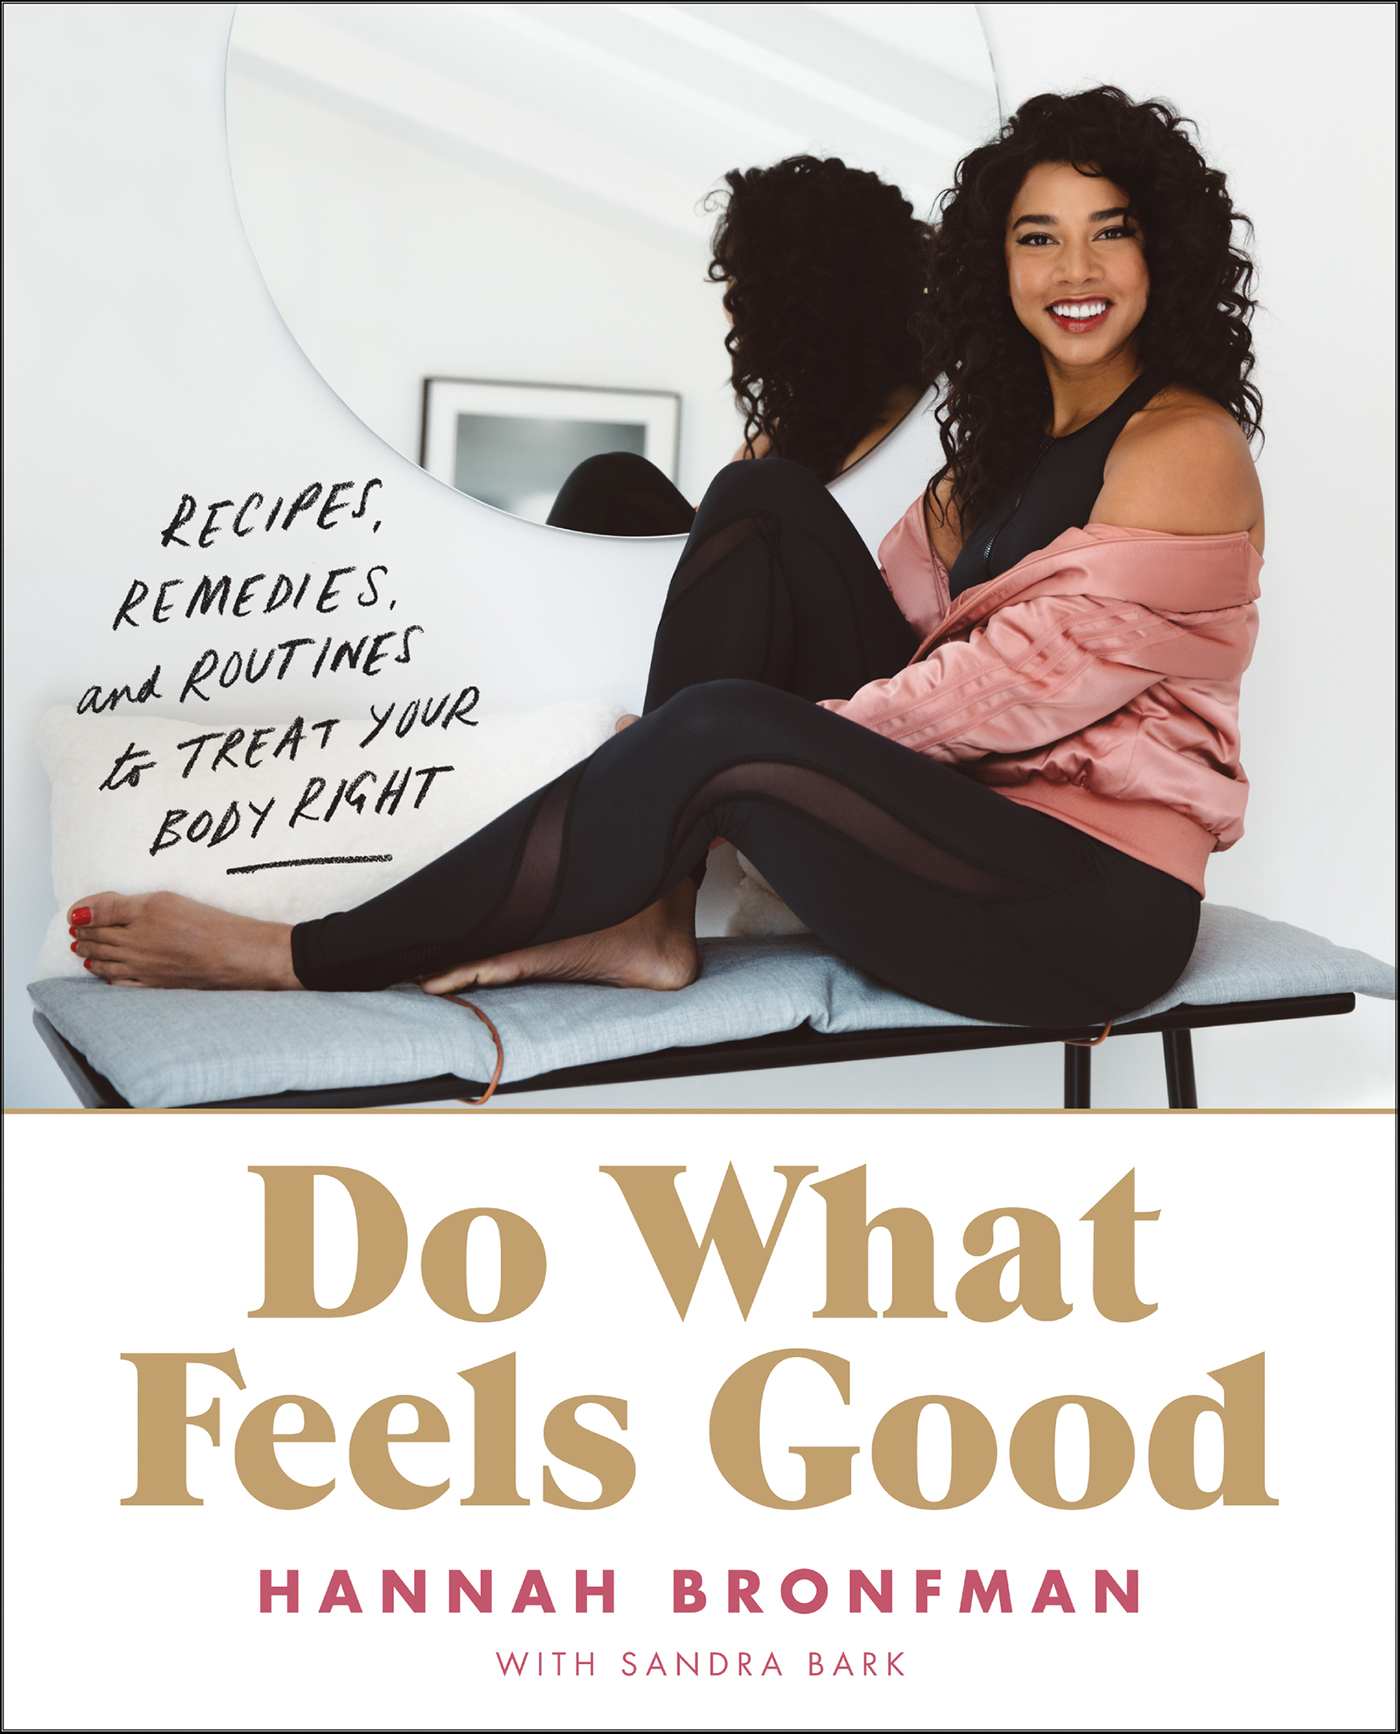 Do what feels good recipes, remedies, and routines to treat your body right cover image